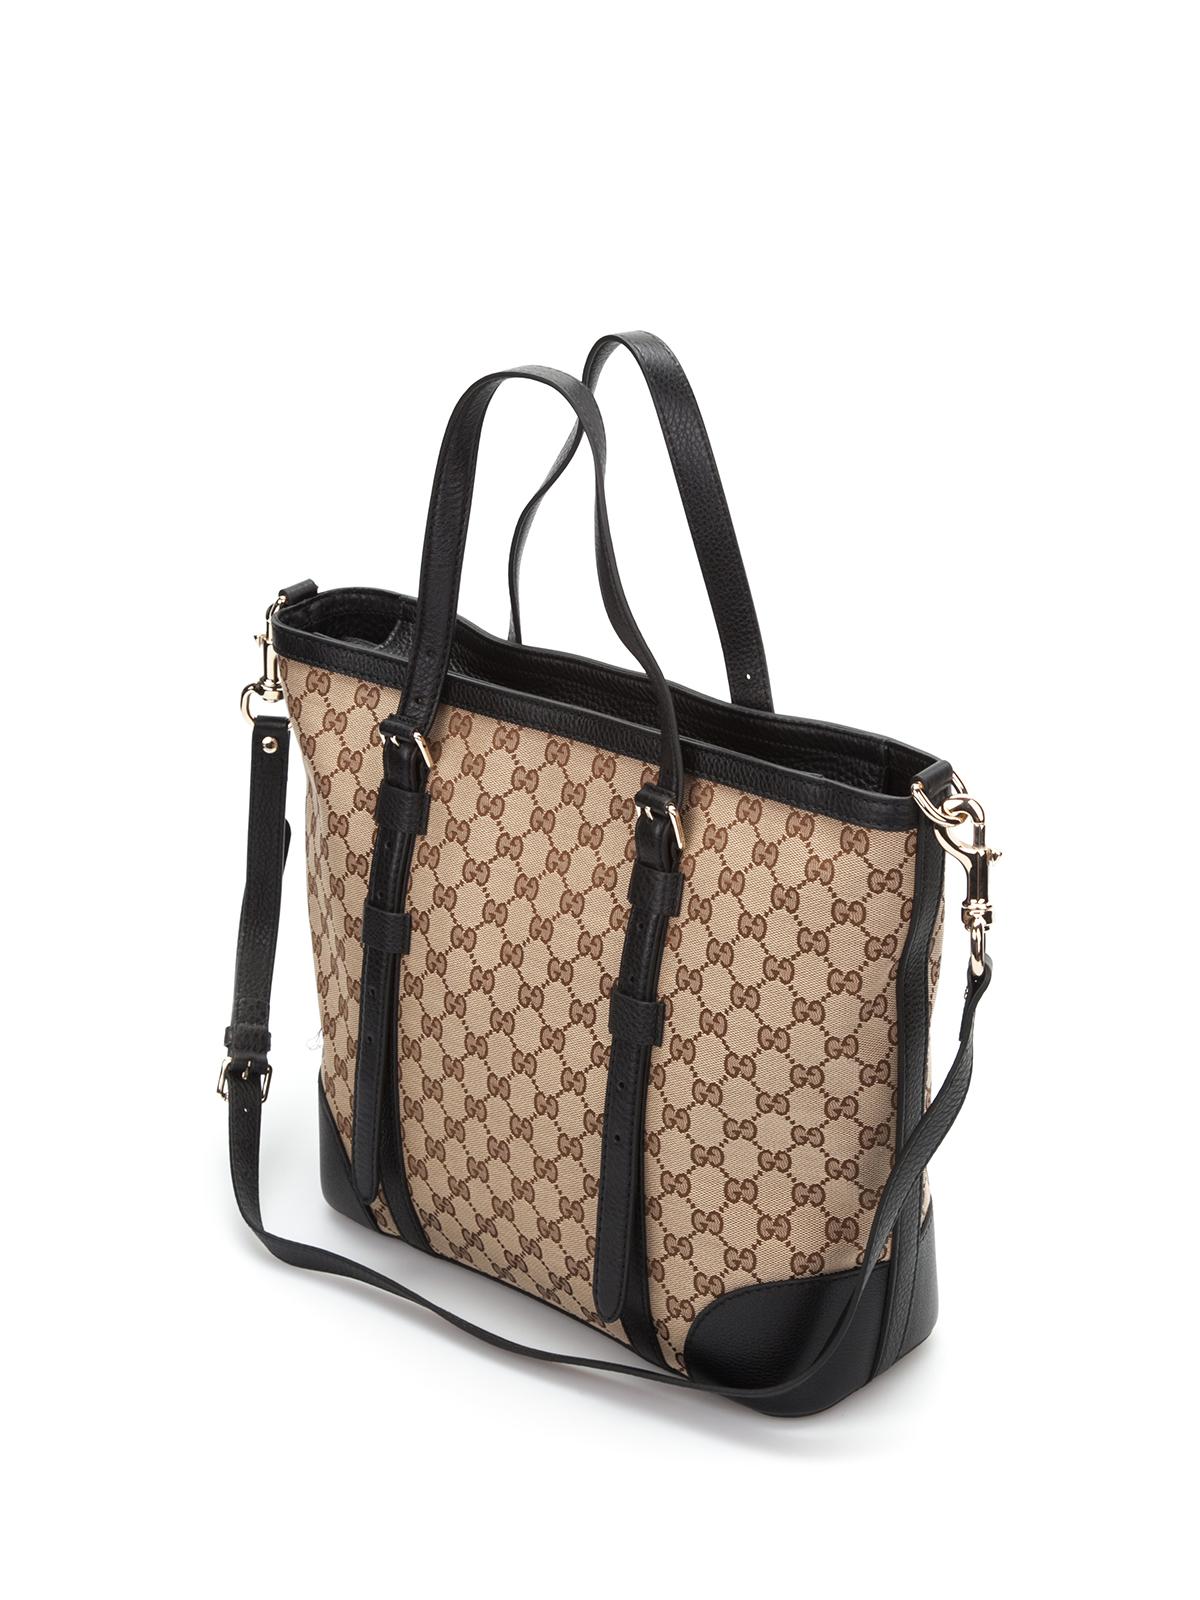 Gucci - GG classic tote - totes bags - 387602KQW1G9769 | www.waterandnature.org